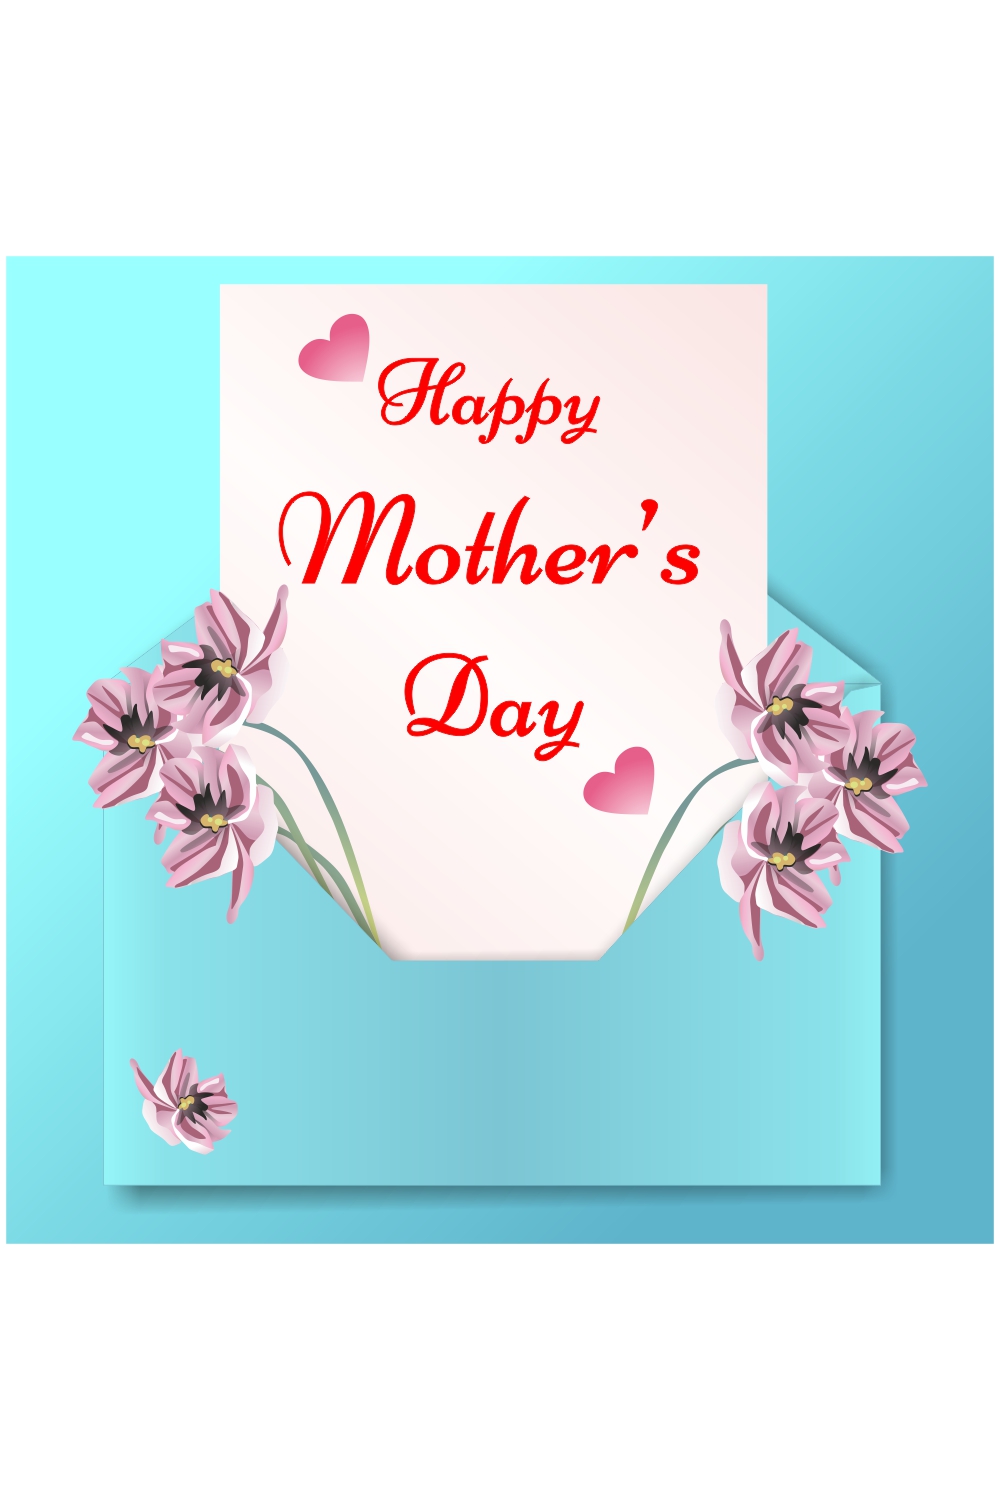 happy mother's day greeting card pinterest preview image.